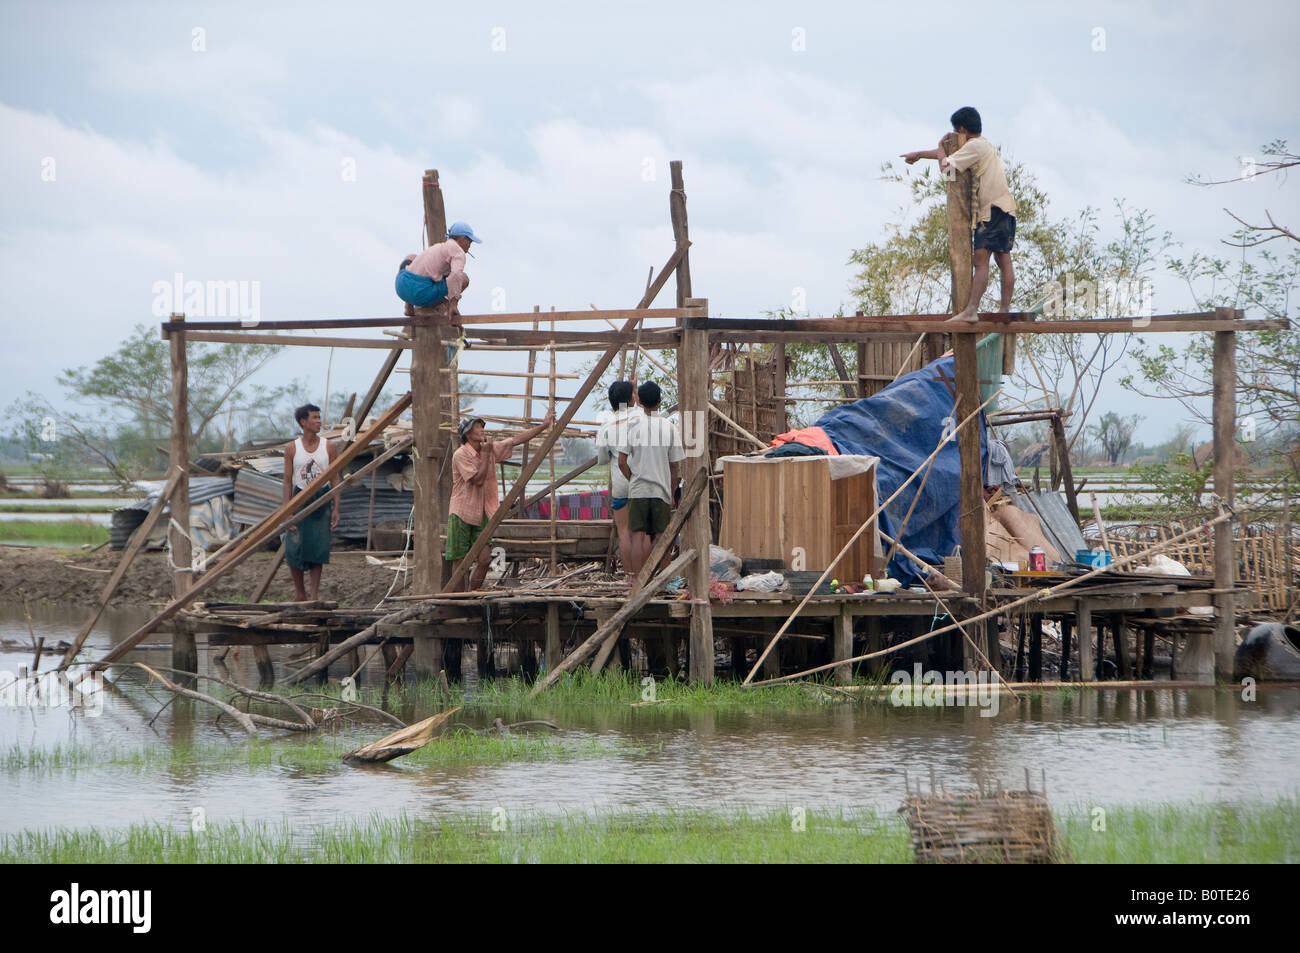 Cyclone Nargis survivors rebuilding a house in a flooded rural area near the city of Yangon Republic of the Union of Myanmar Stock Photo